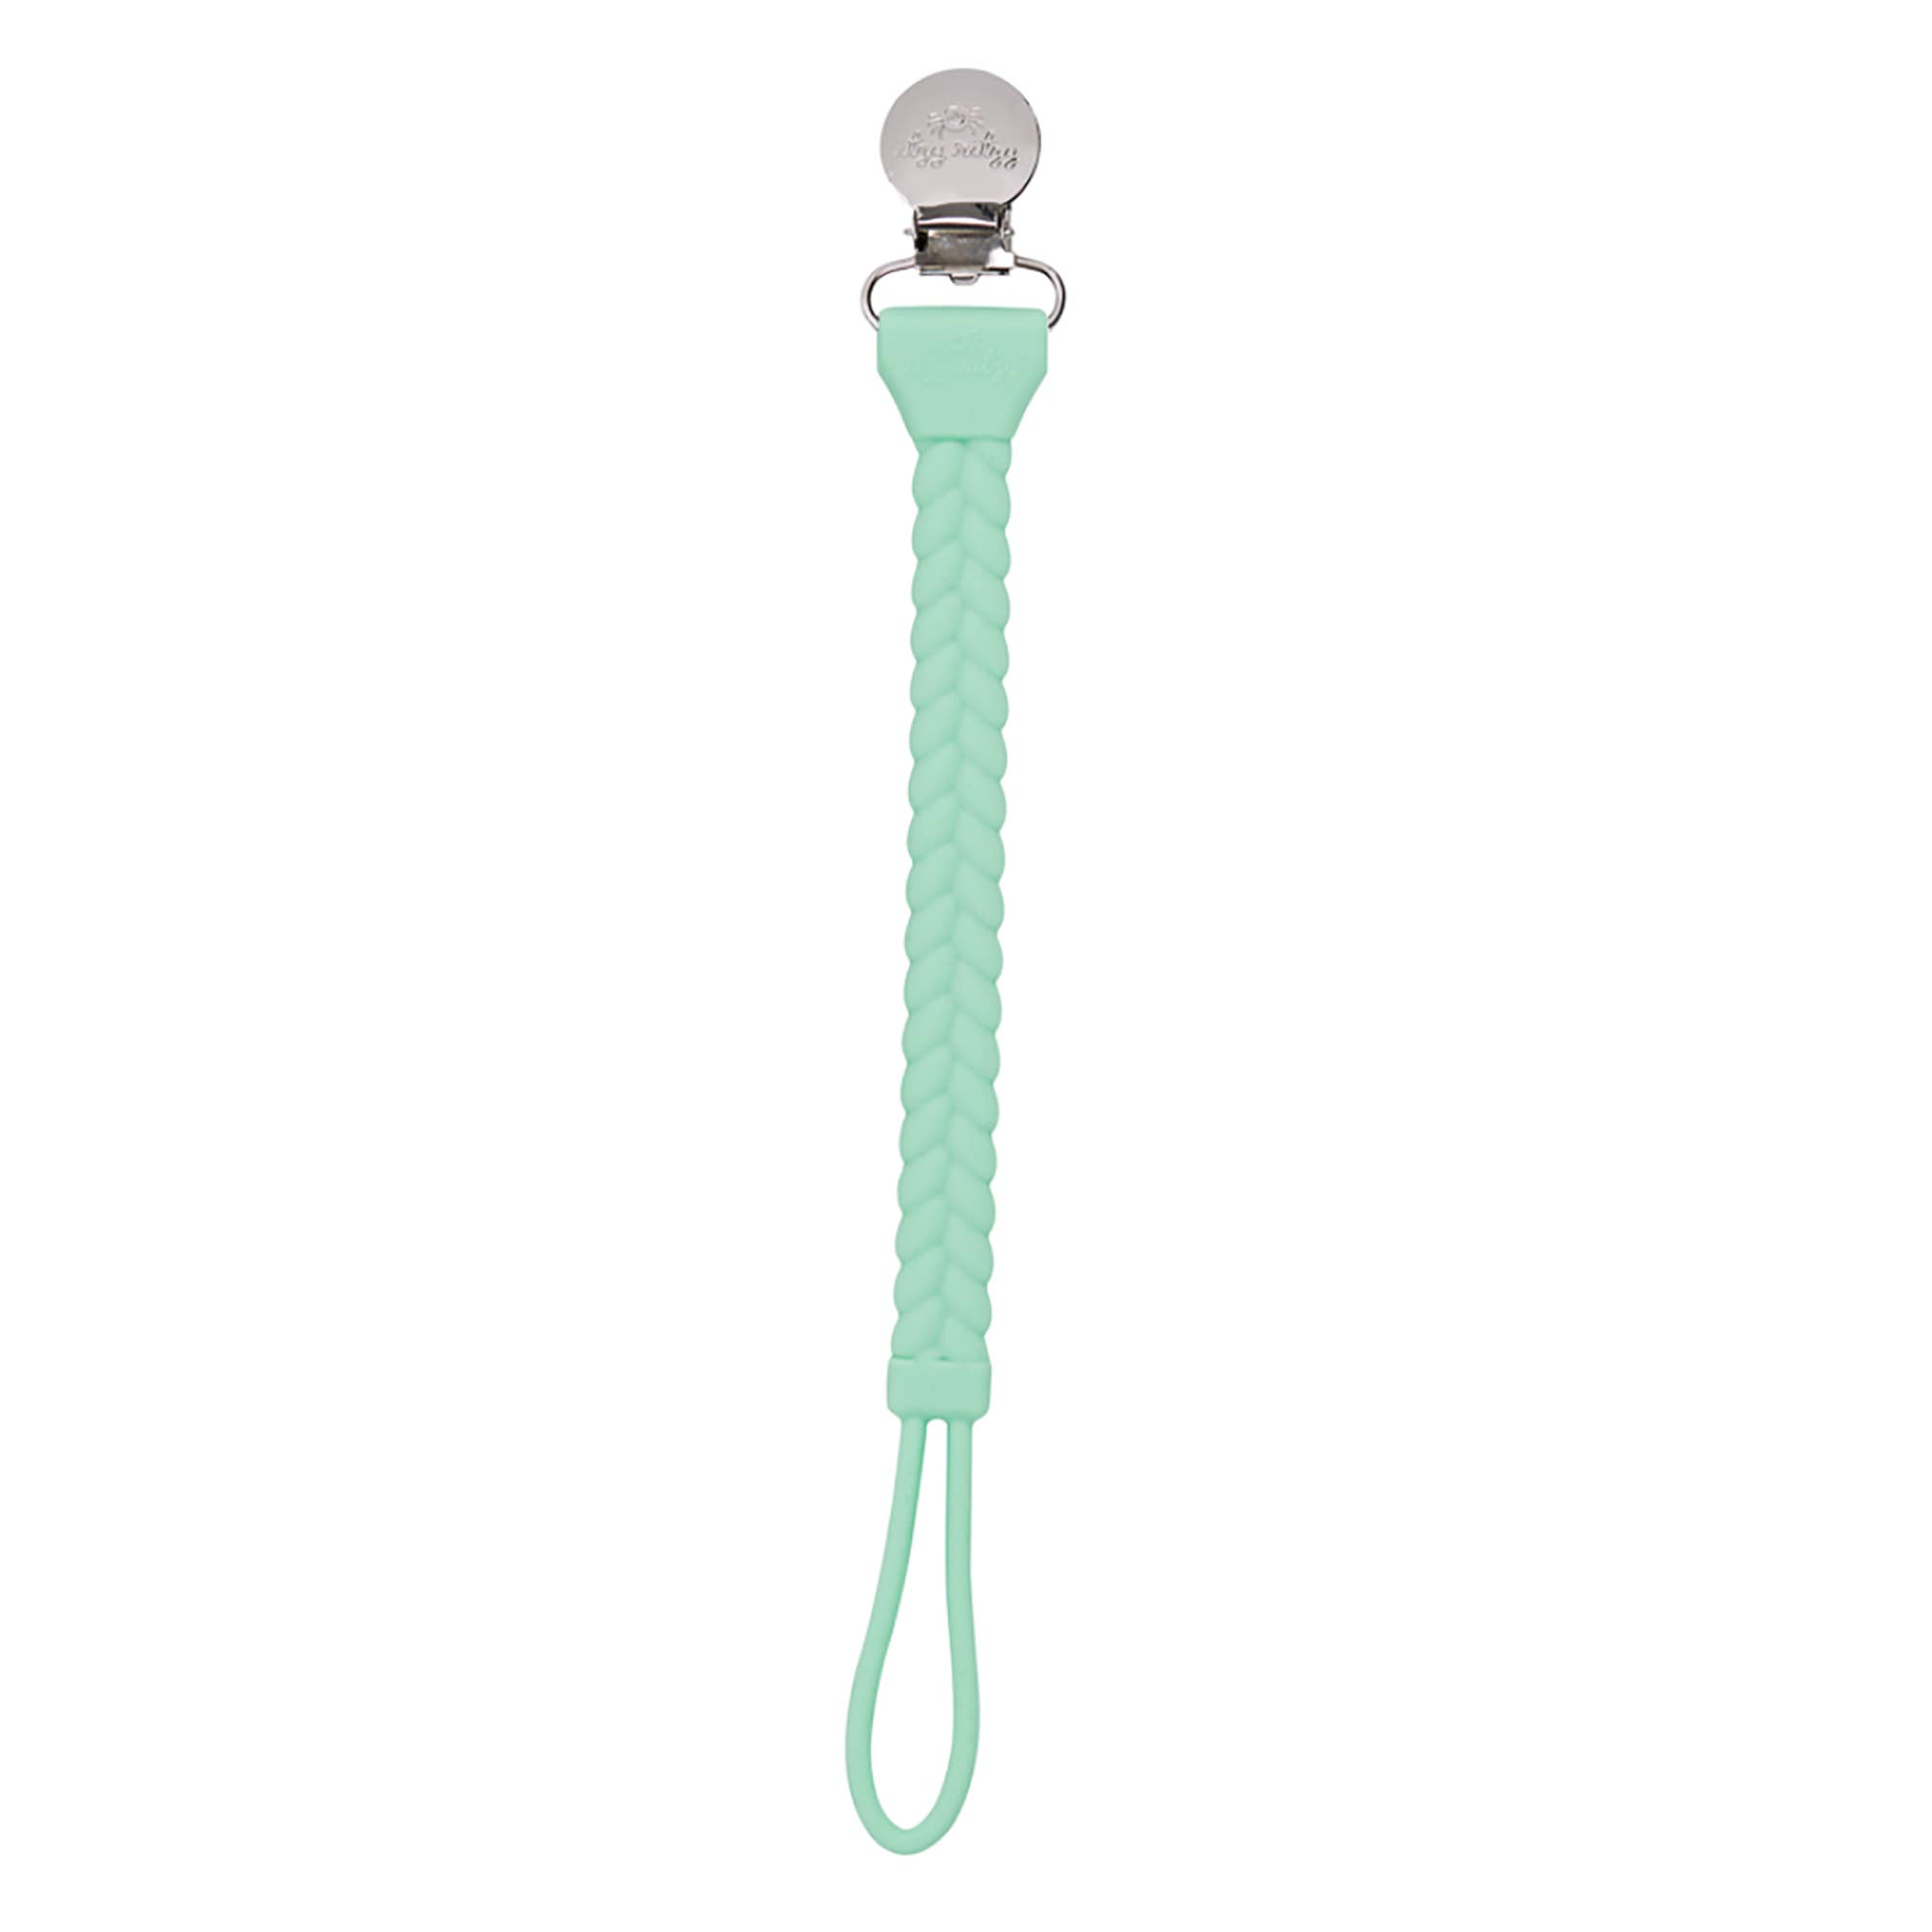 Itzy Ritzy Sweetie Strap Silicone One-Piece Pacifier Clips in Mint Braid